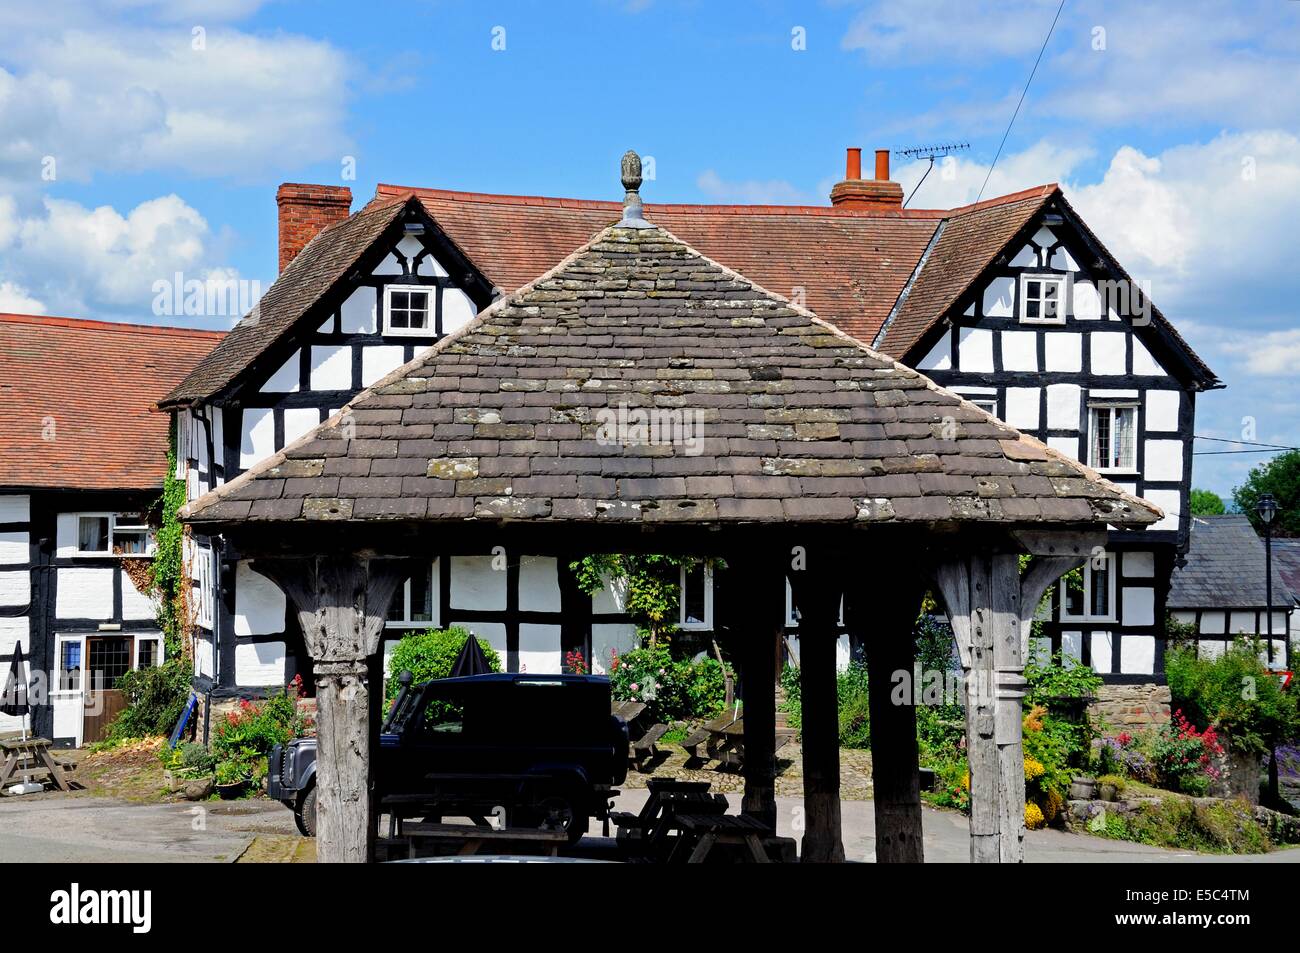 View of the New Inn Public House and Market Hall in the Market Square, Pembridge, Herefordshire, England, UK, Western Europe. Stock Photo